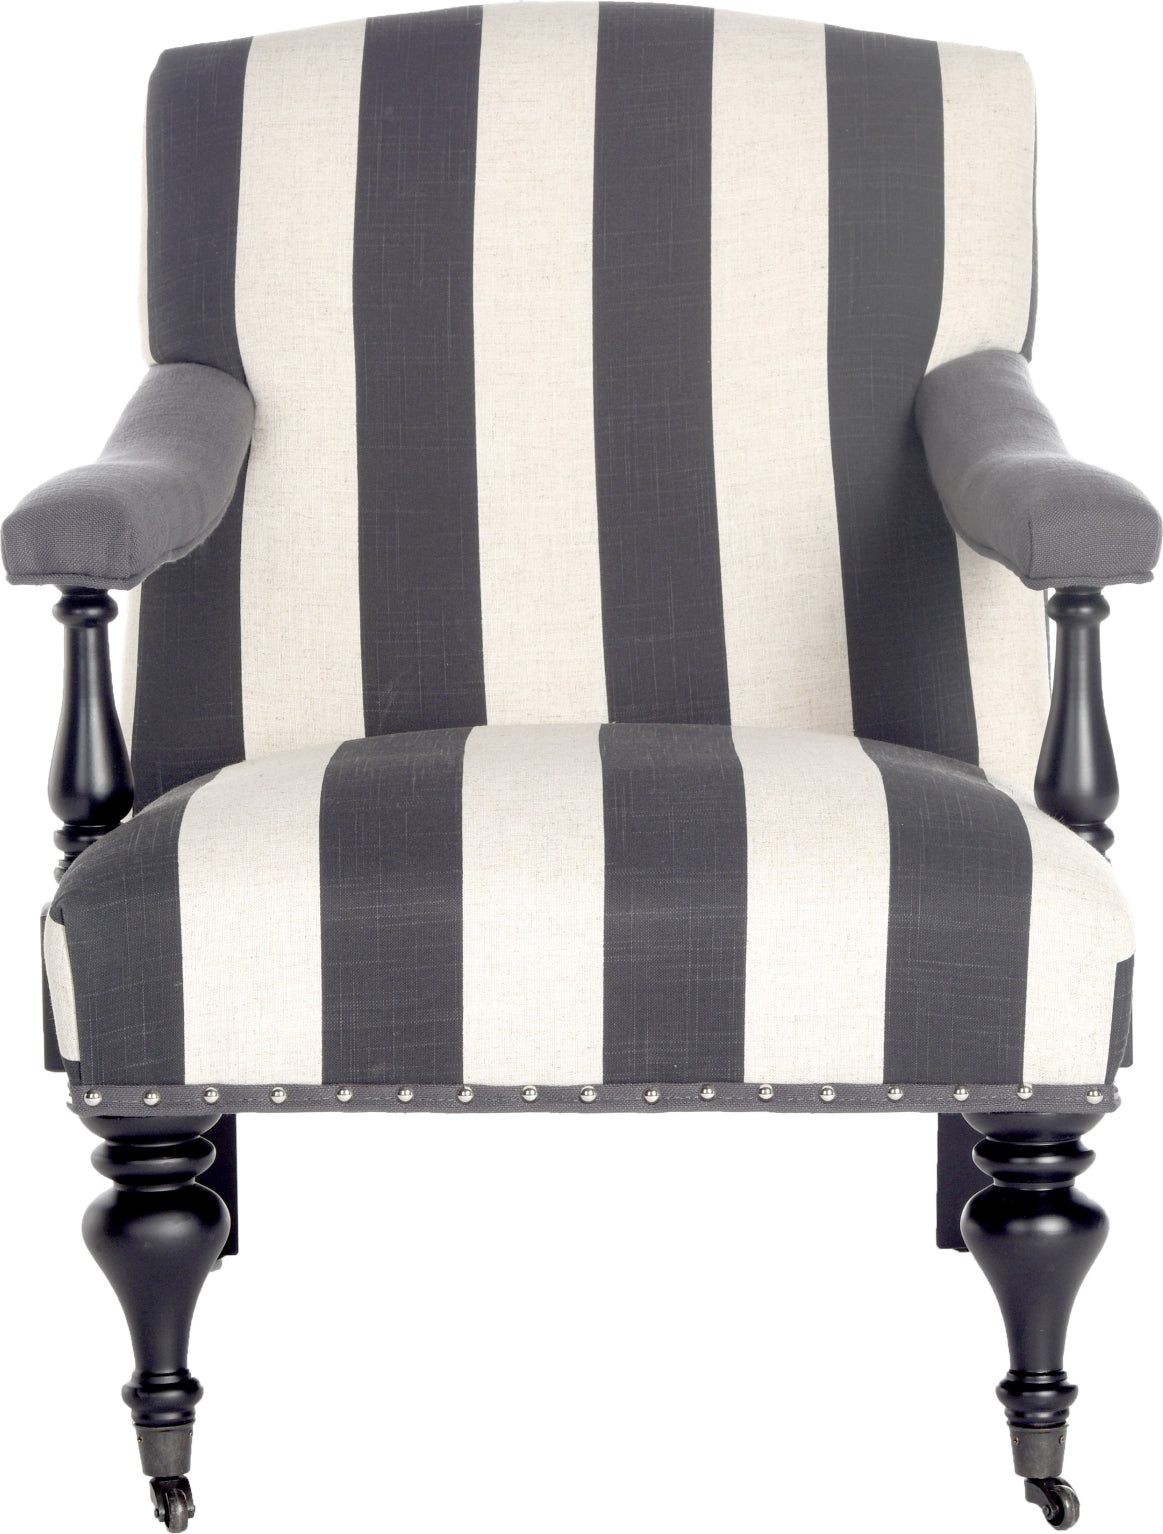 Safavieh Devona Awning Stripe Arm Chair-Silver Nail Heads Charcoal and White Furniture main image